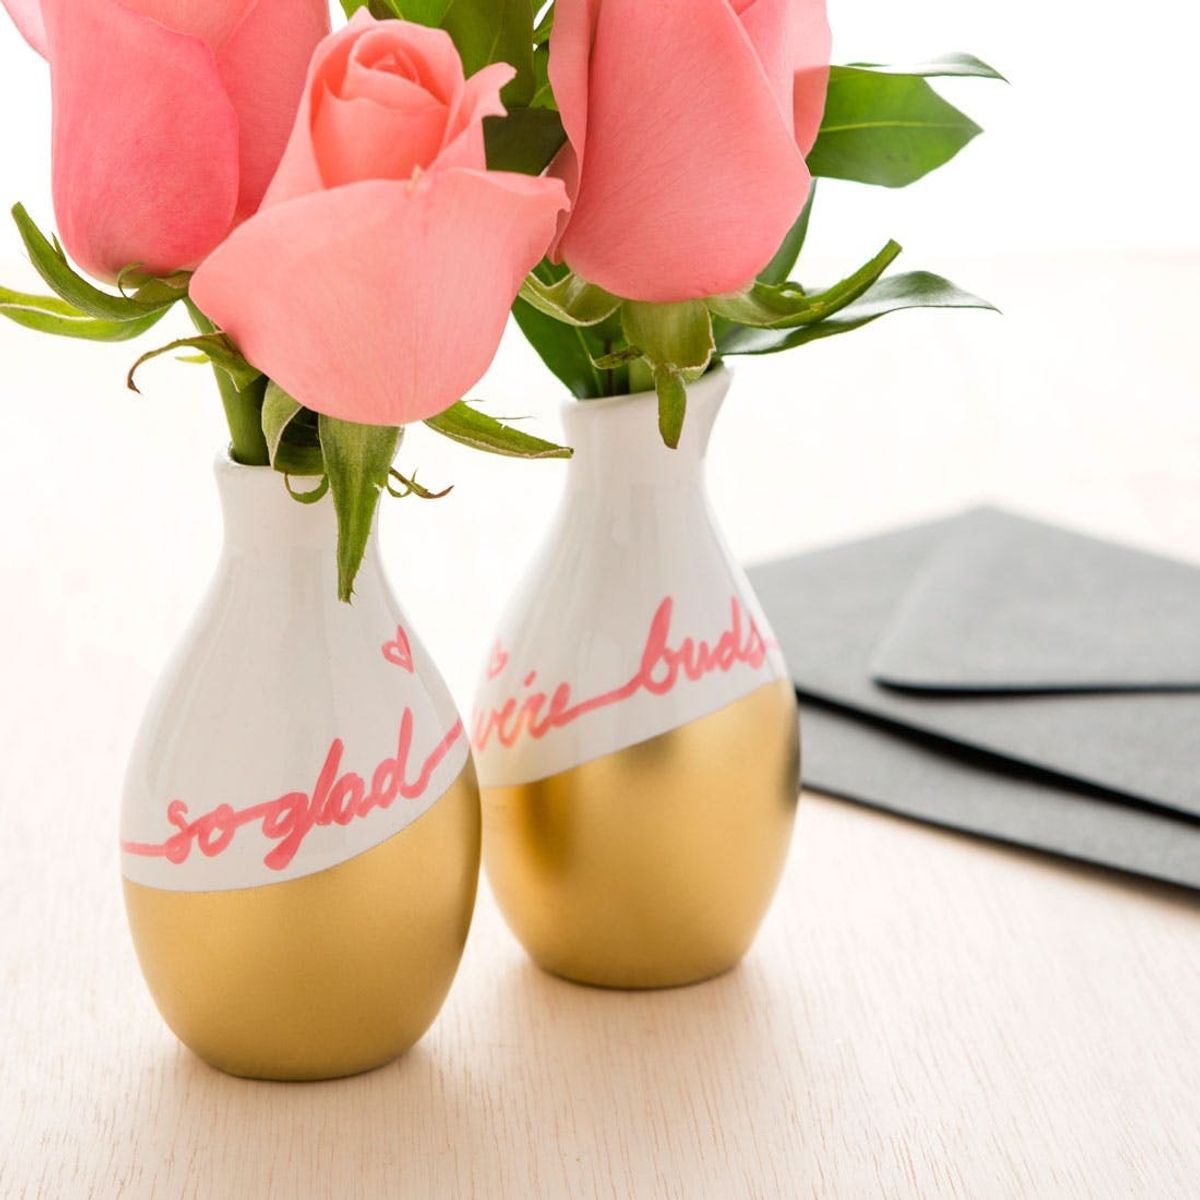 So Glad We’re Buds! How to Make Bud Vases for Your Valentines